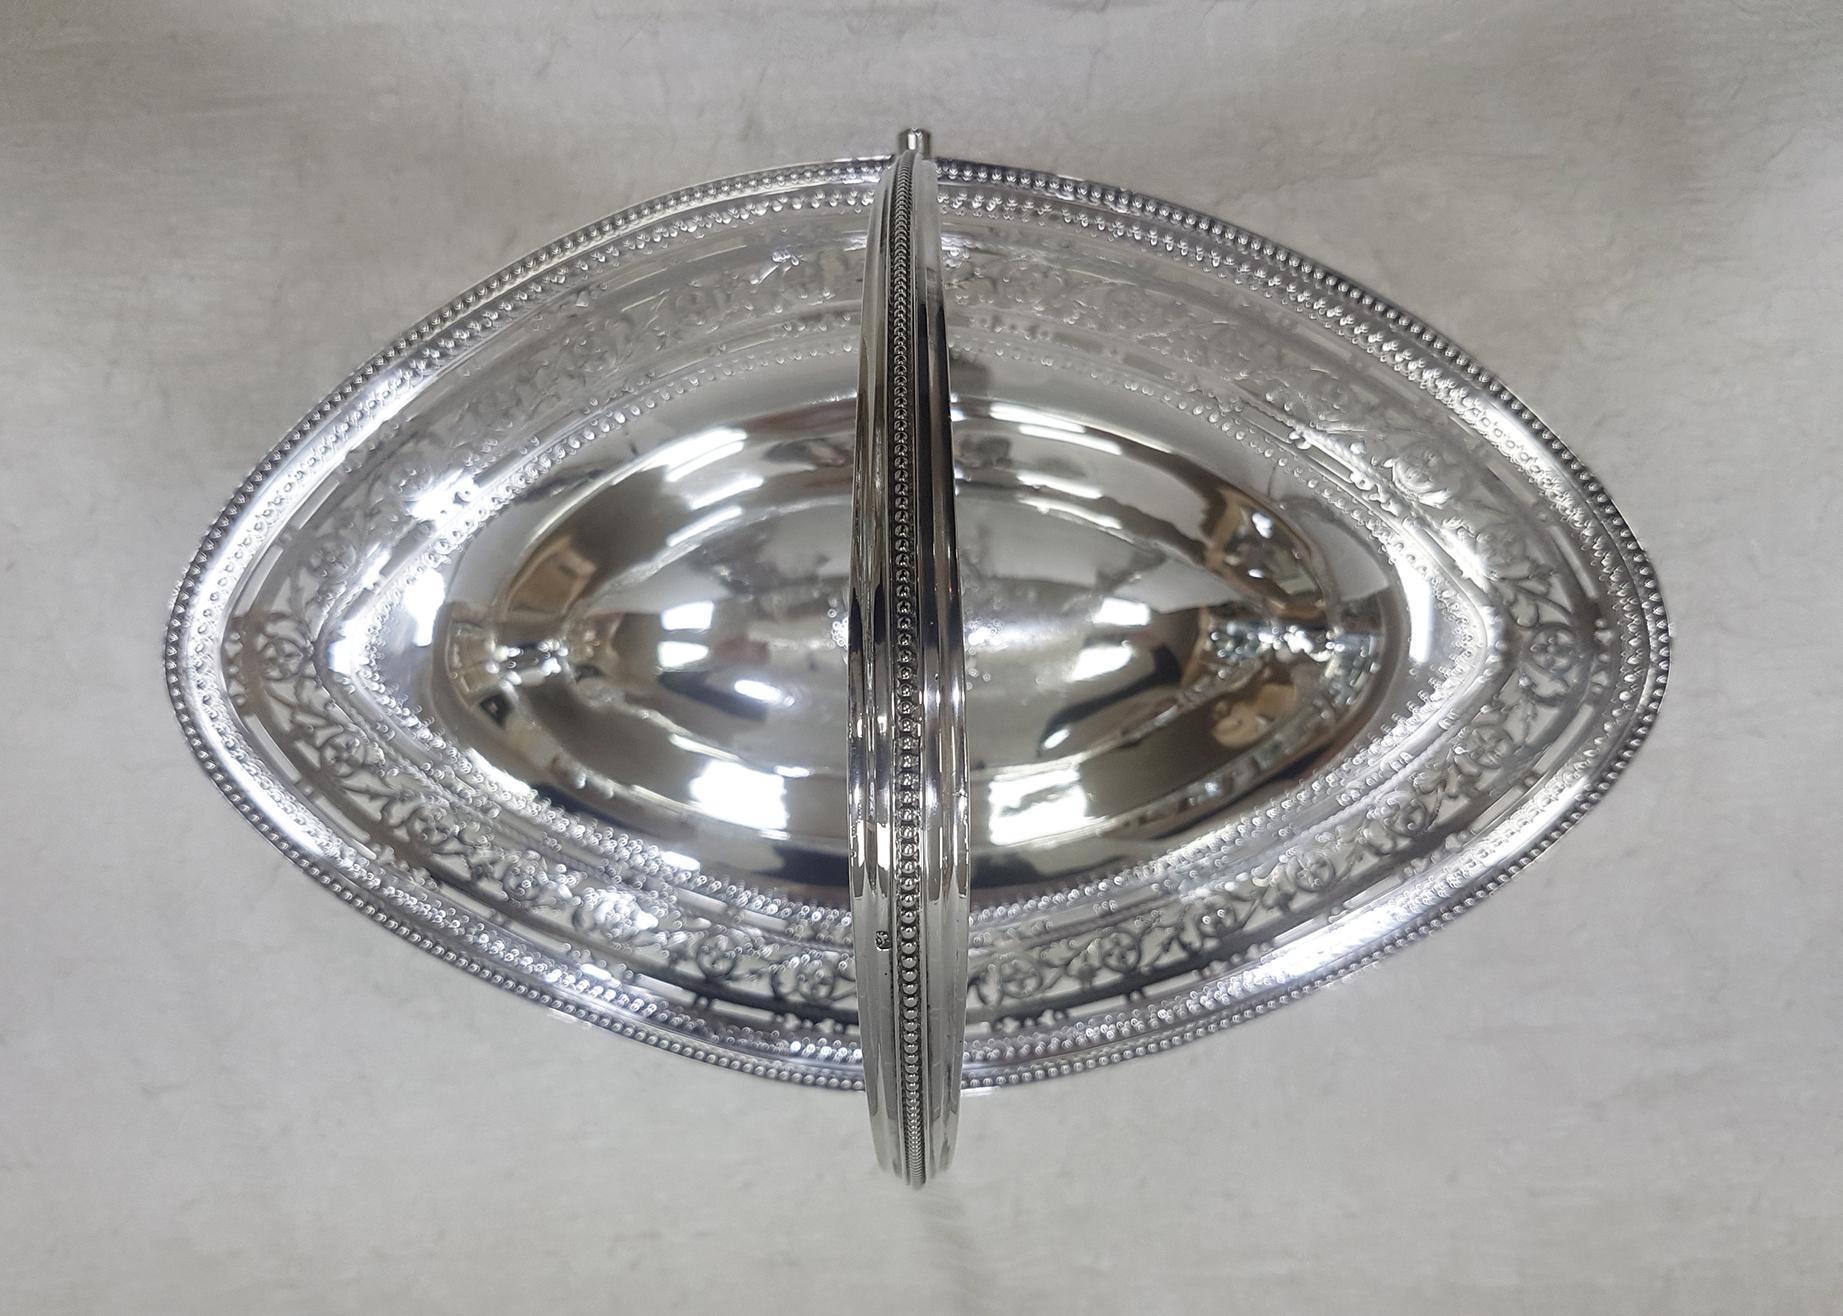 A George III sterling silver cake basket made by William Plummer in London, 1786. The basket is of Classic oval form with bead borders and an engraved pierced gallery and foot. There is also an original coat of arms to the centre. The length of the